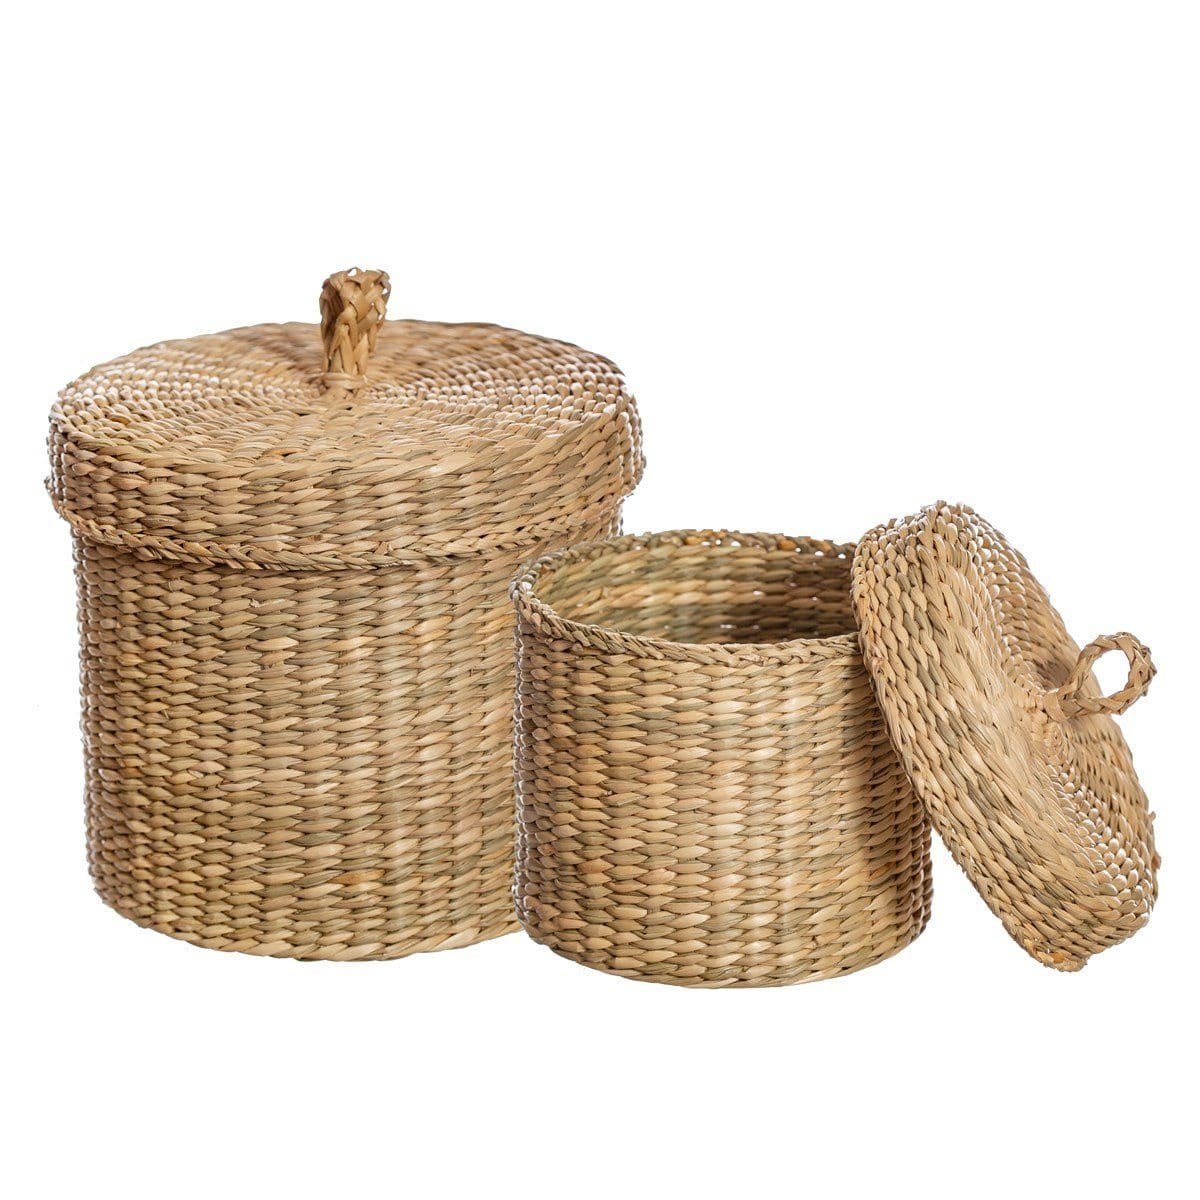 Seagrass Baskets With Lid - Set of 2 - Kaftan direct